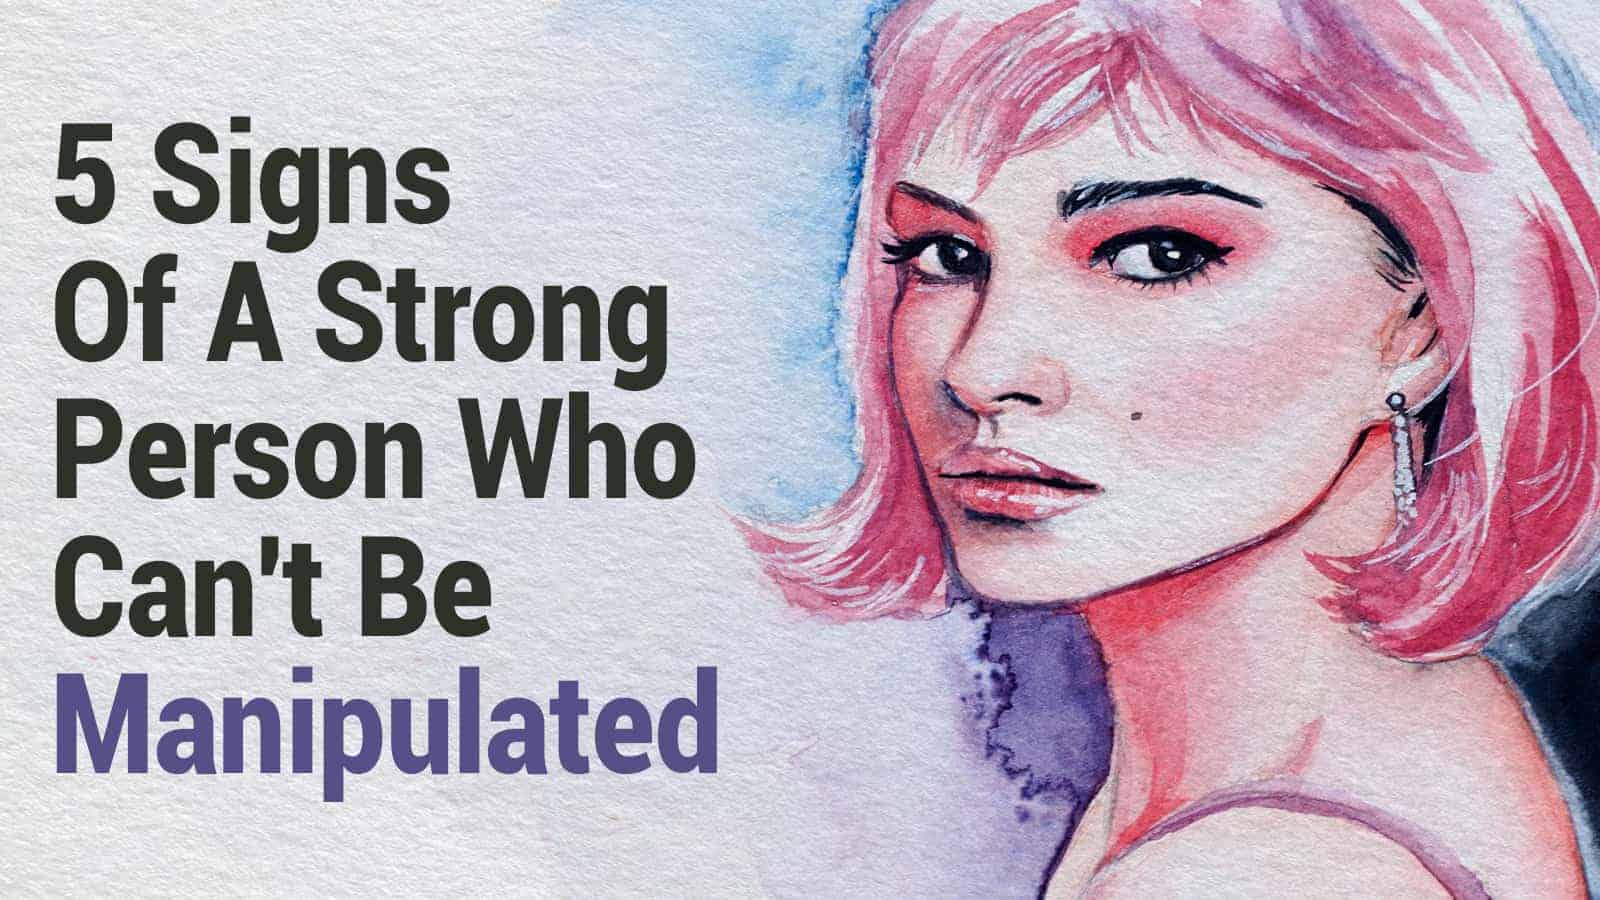 5 Signs Of A Strong Person Who Can’t Be Manipulated